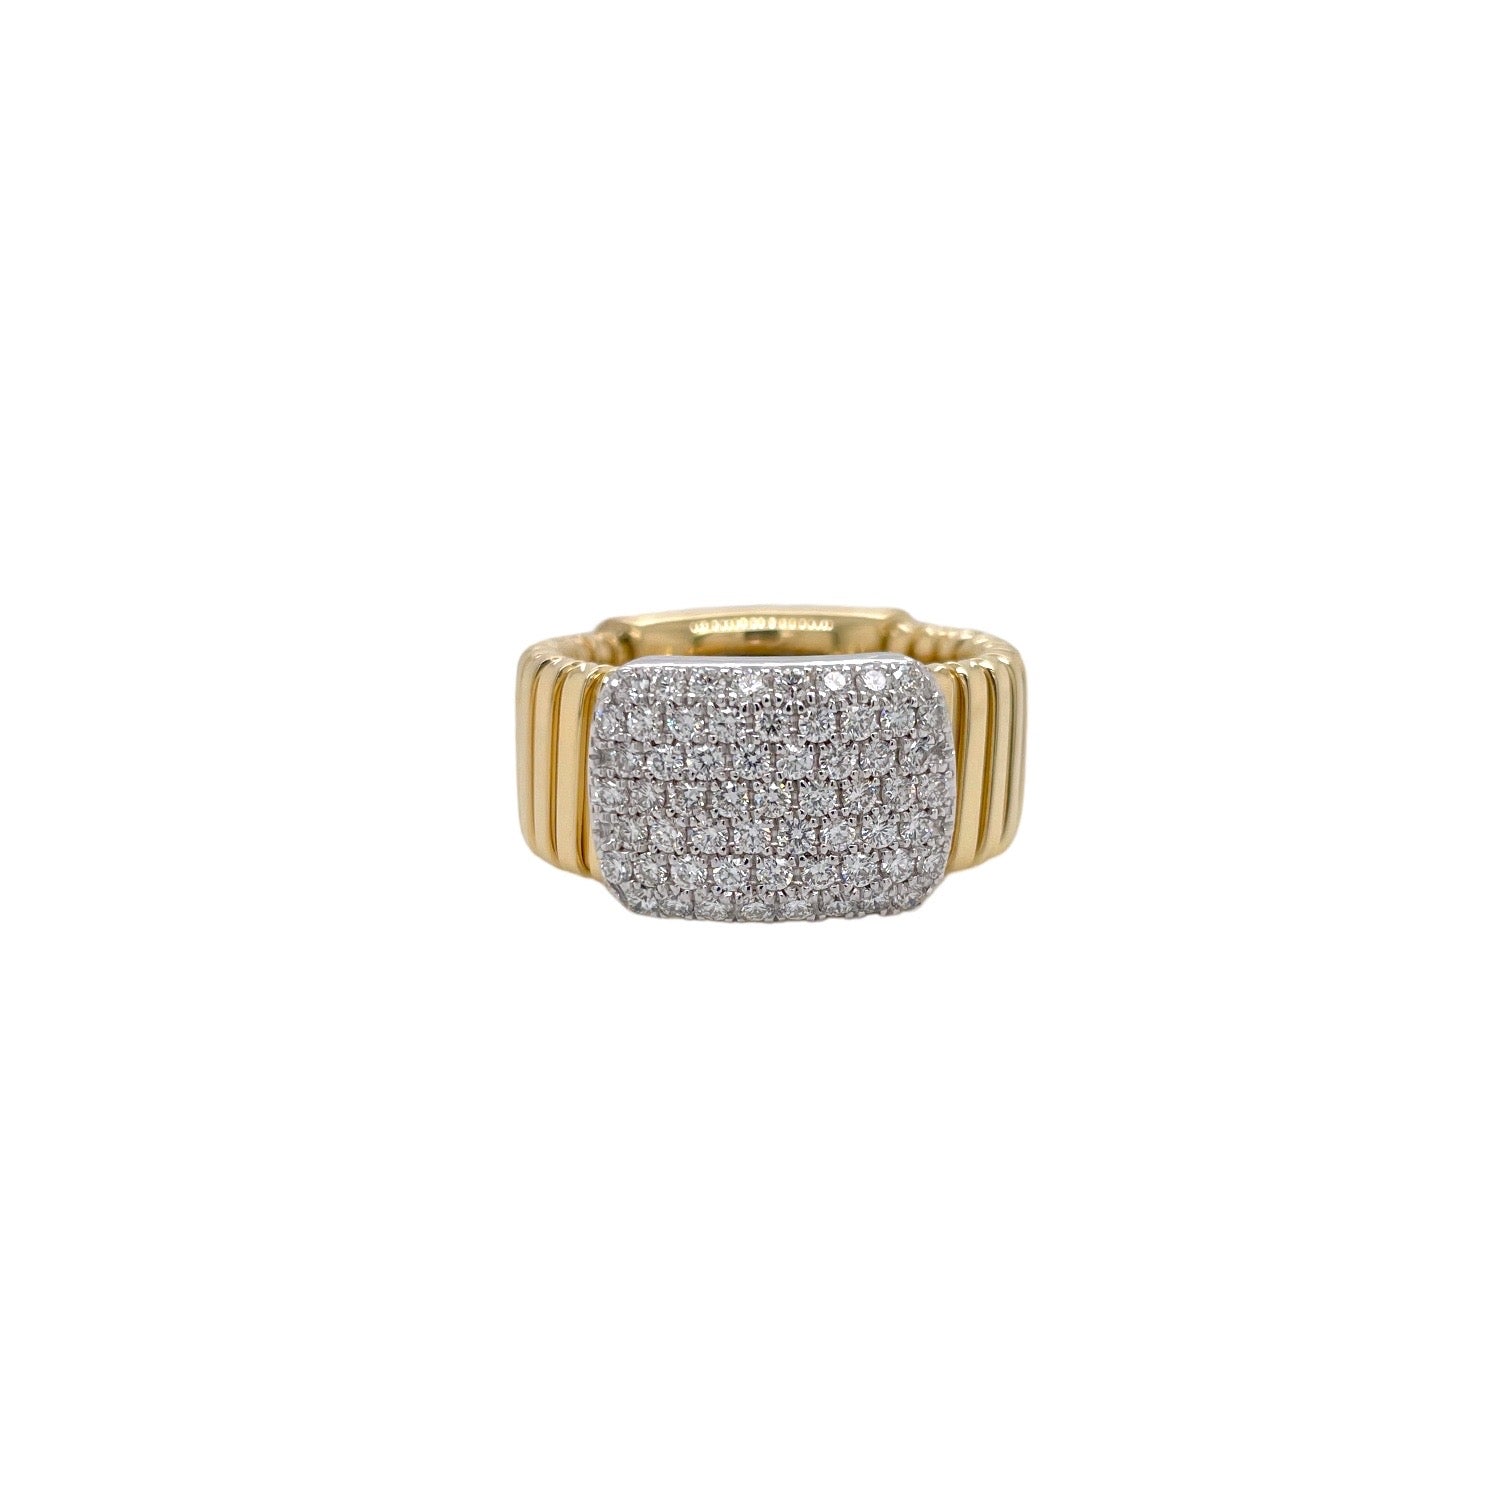 Wide Pave Diamond Accent Ring in Two Tone Gold